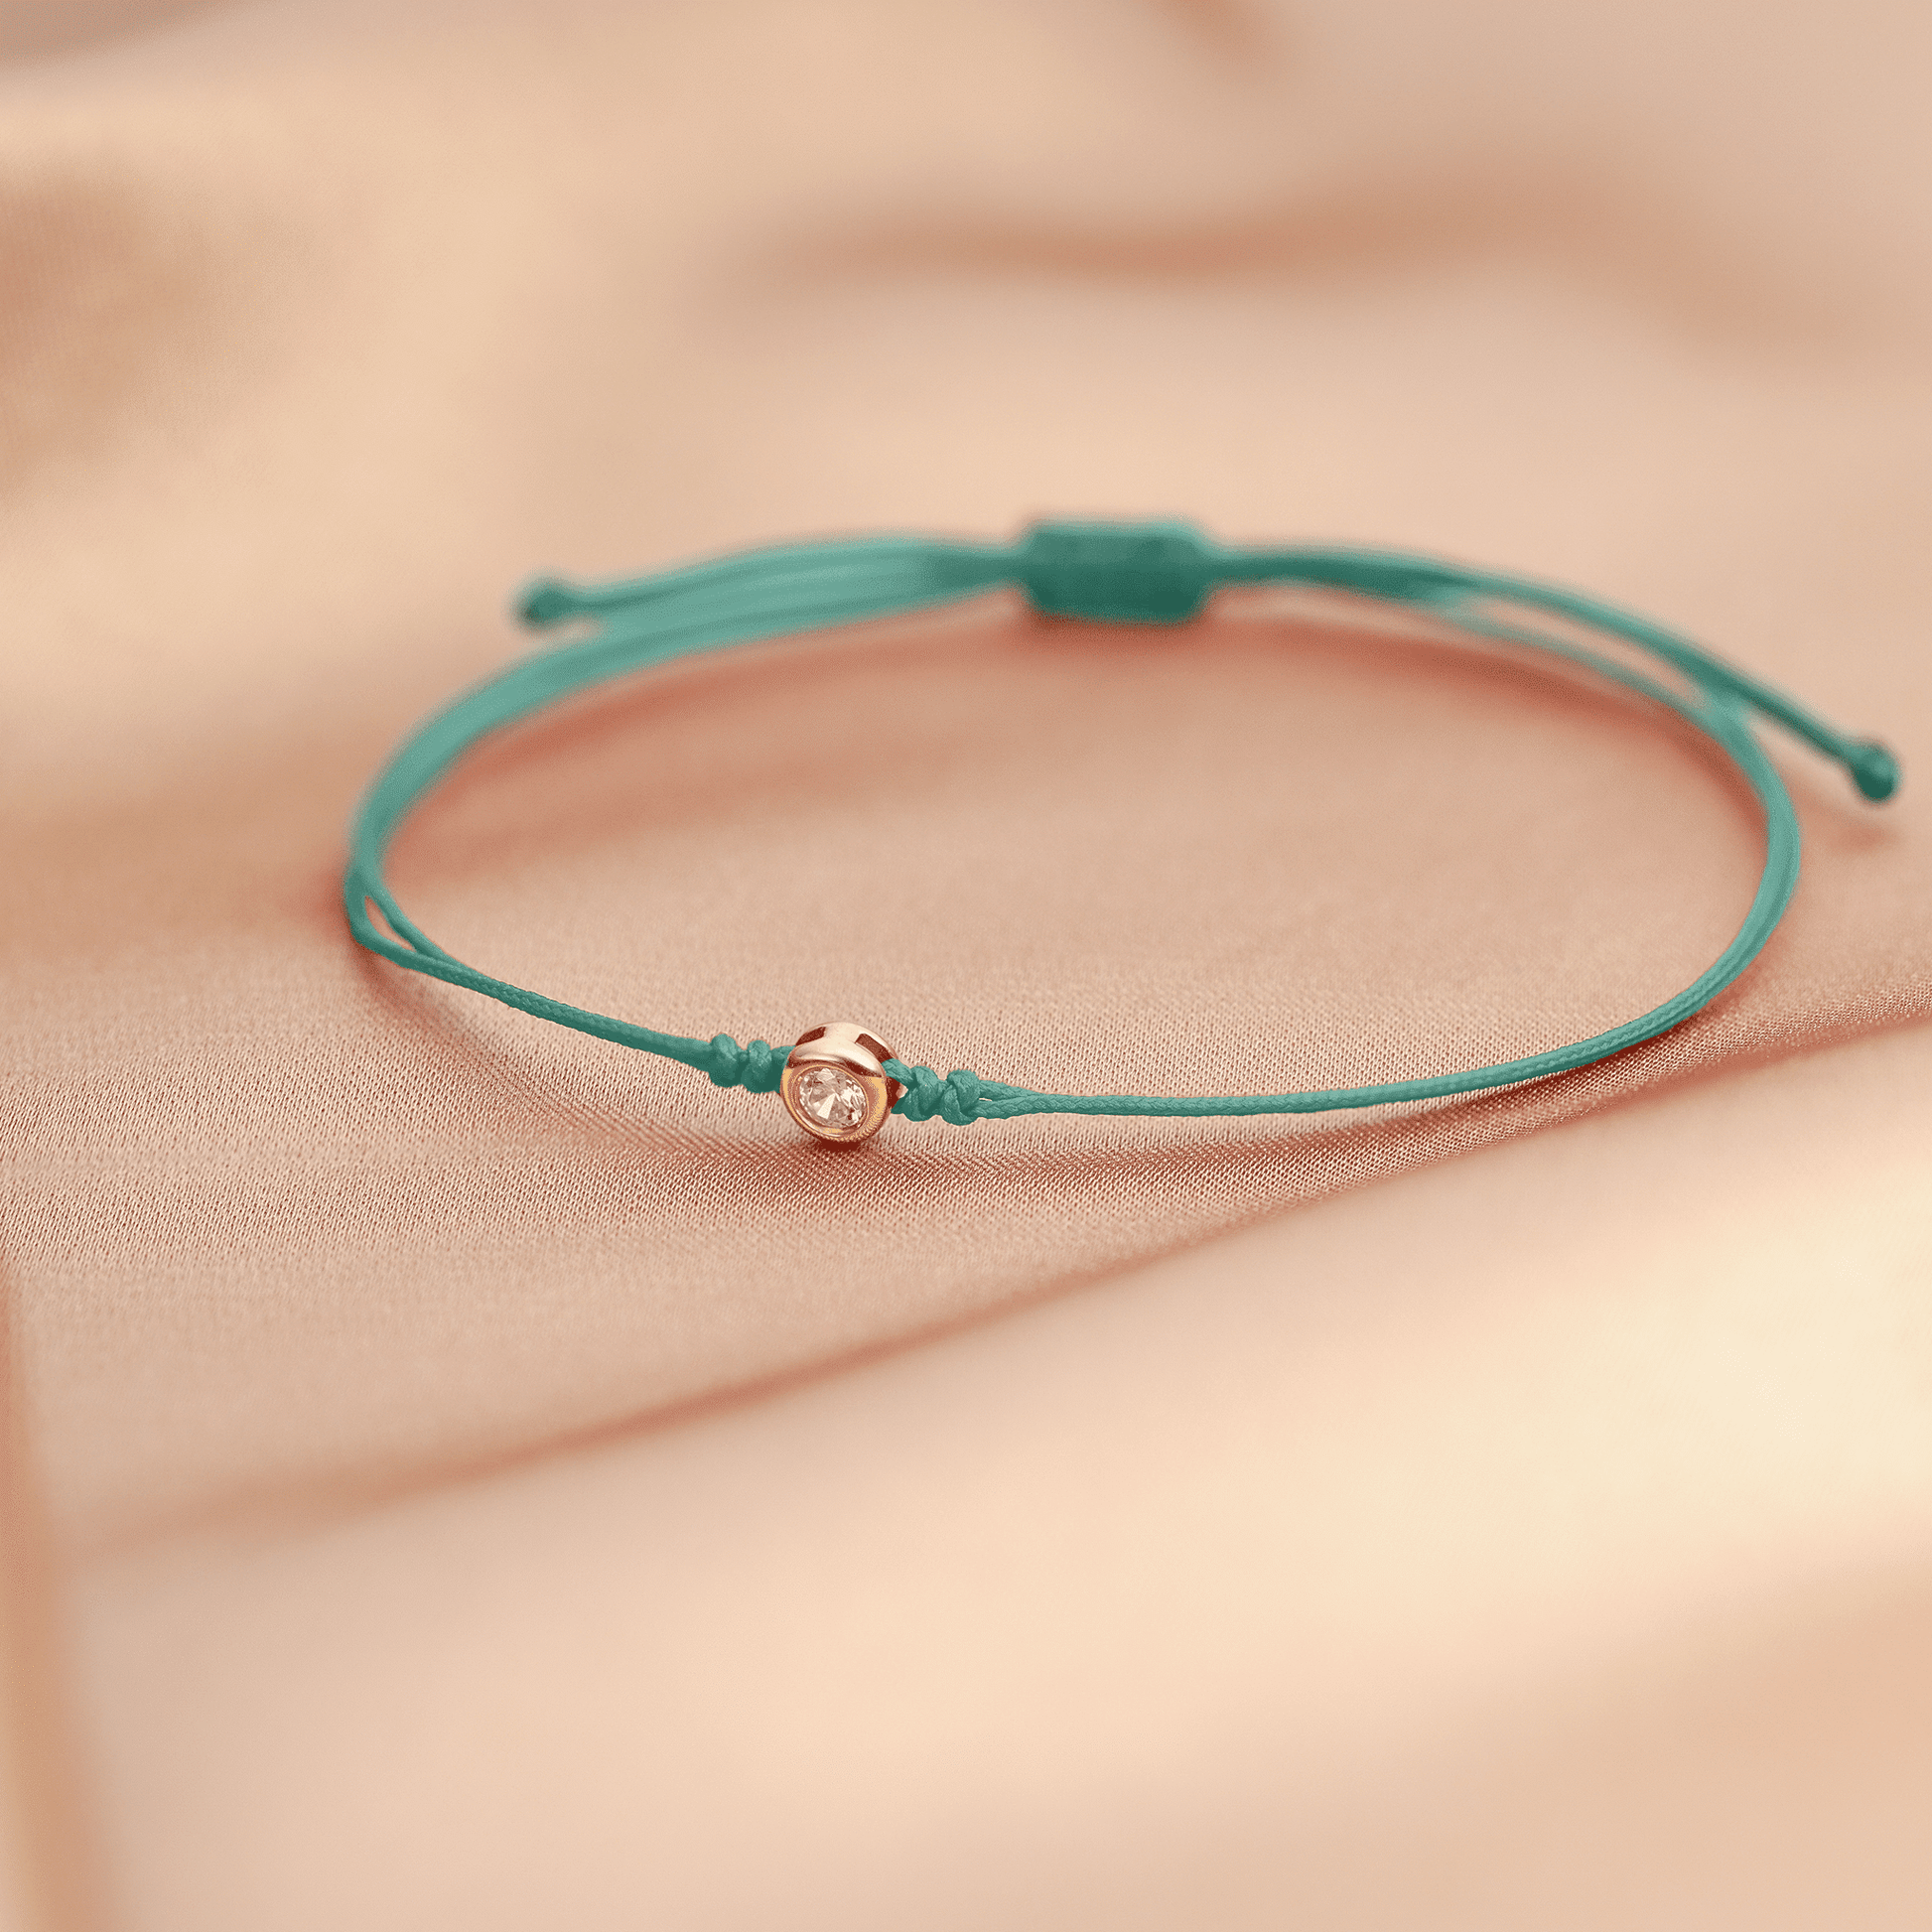 Summer Edition : The Classic String of Love - 14K Yellow Gold Bracelets magal-dev 